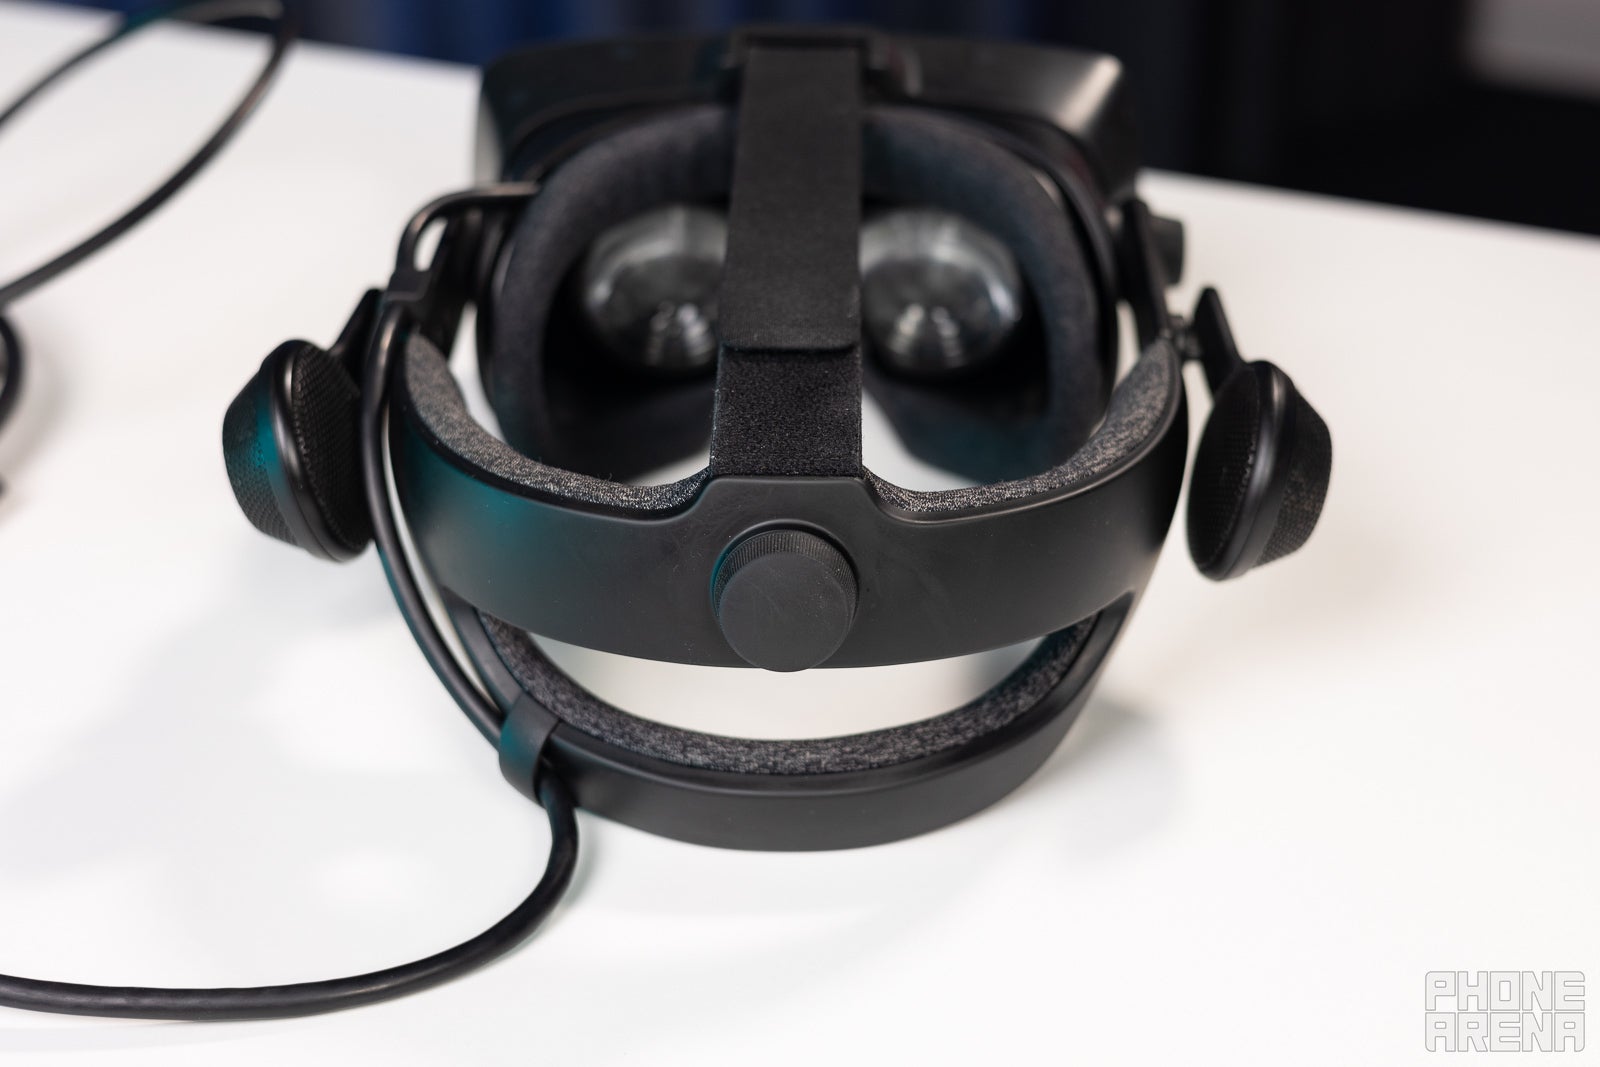 (Image Credit - PhoneArena) The Valve Index default head strap - Meta Quest 2 vs Valve Index: Meta is just on another level with its virtual reality headsets